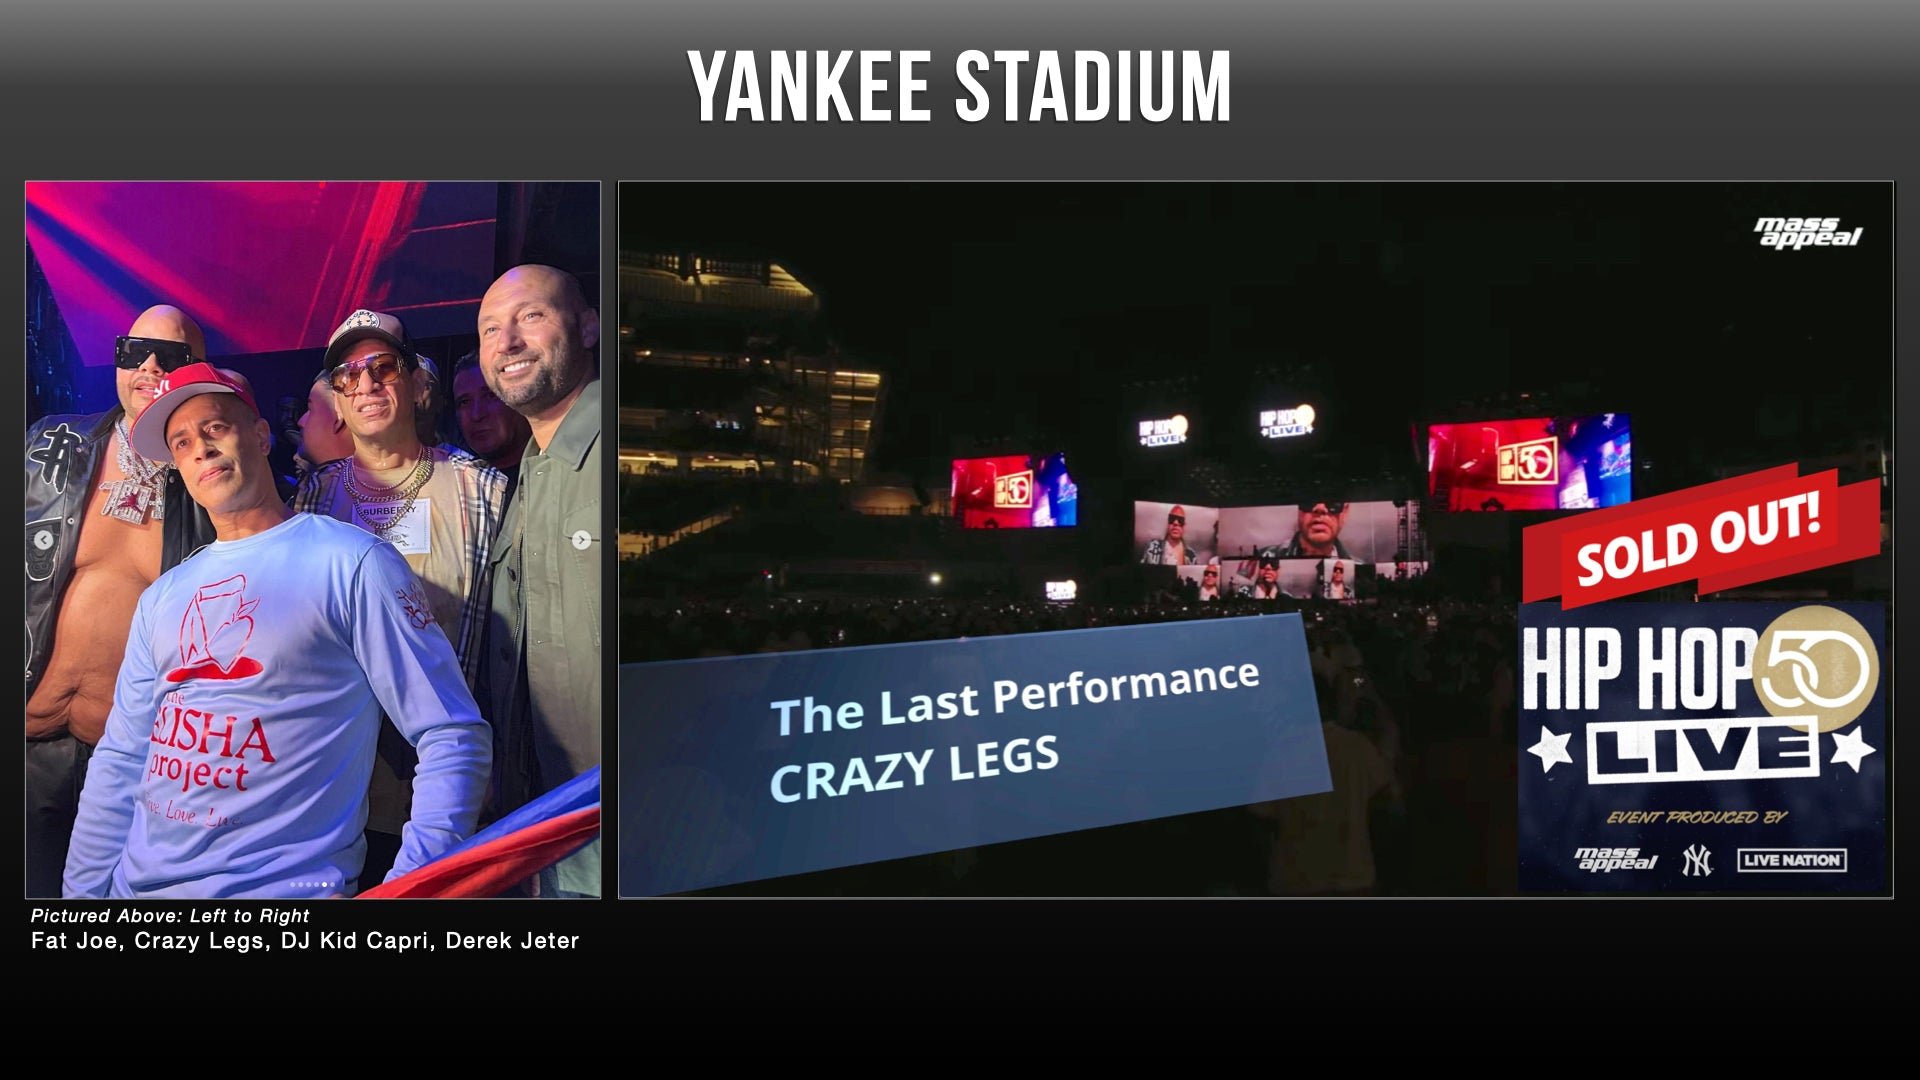 Load video: Hip Hop 50 - Live at Yankee Stadium (SOLD OUT)